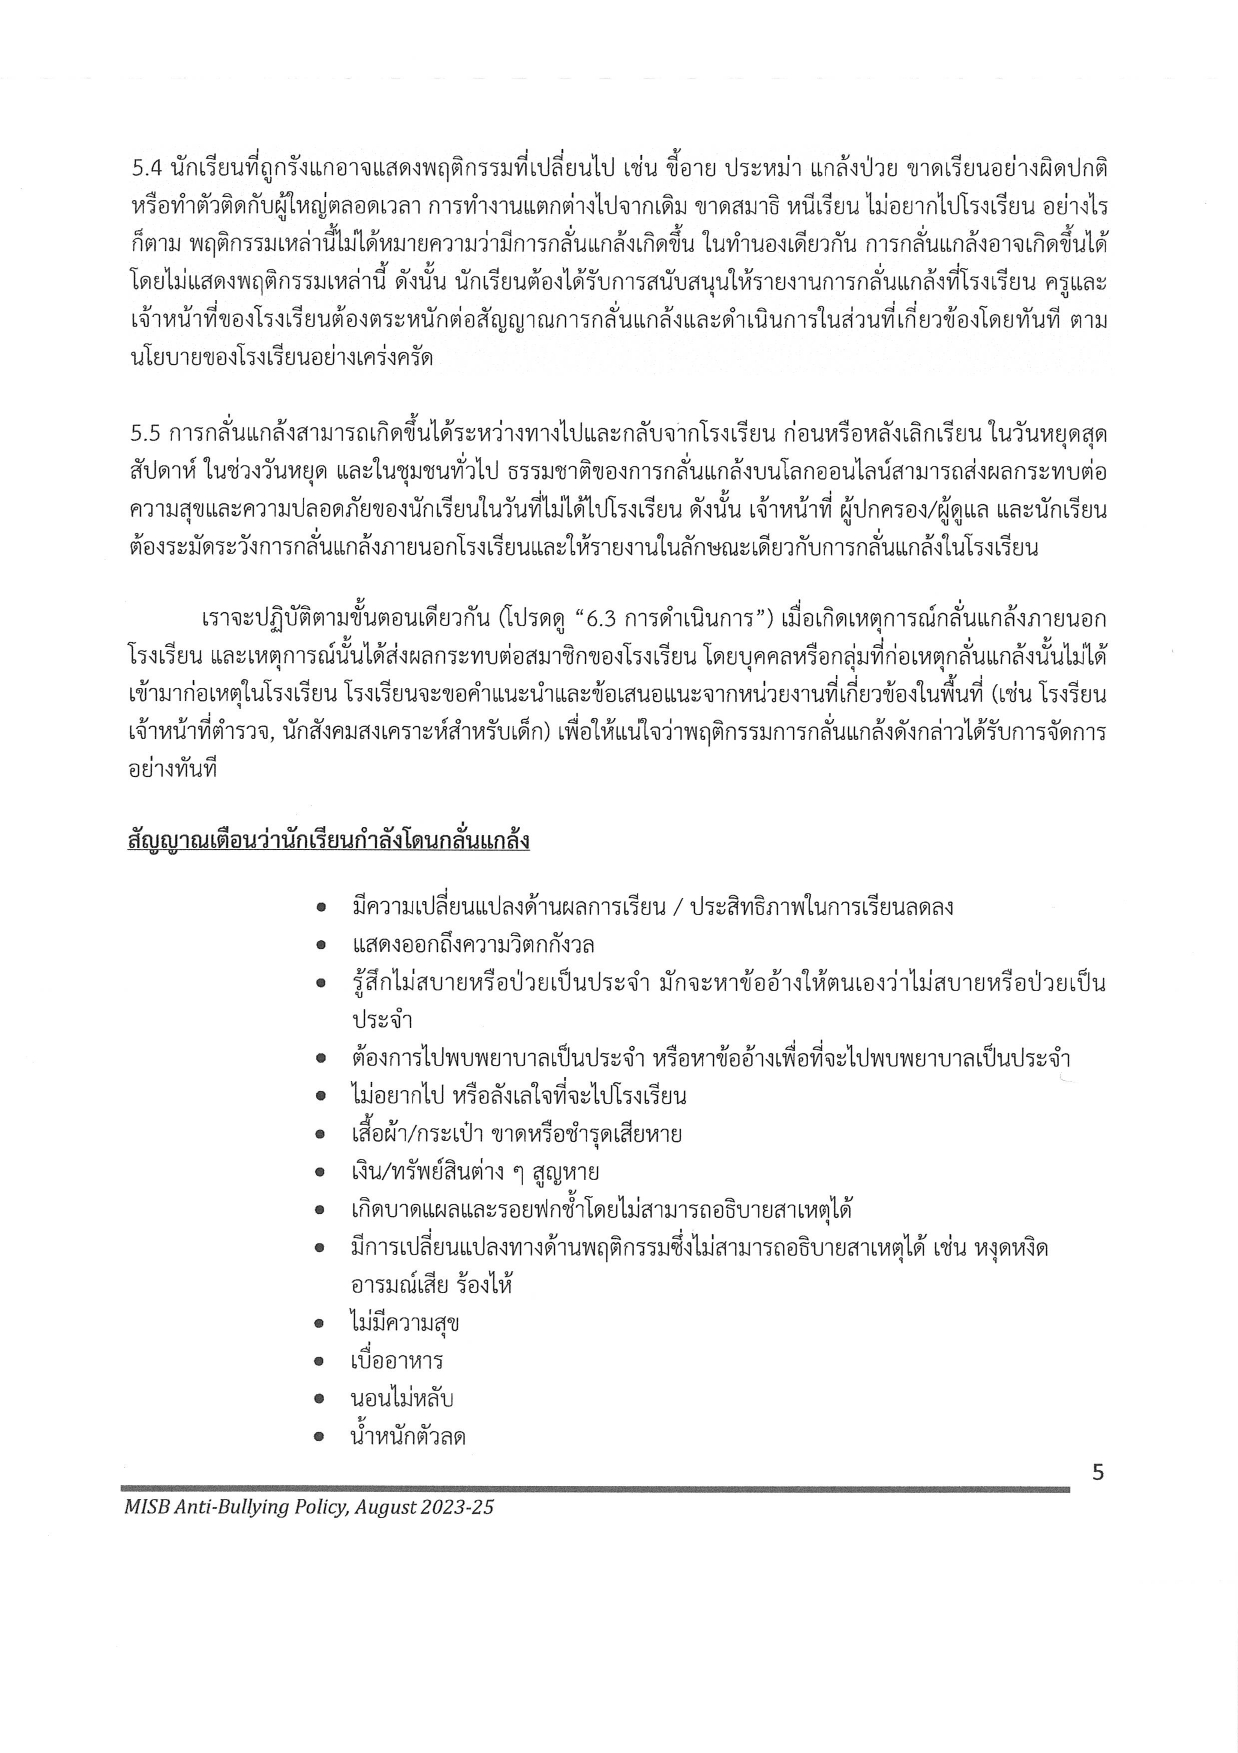 Anti Bullying Policy 2023 2025 Thai page 0007